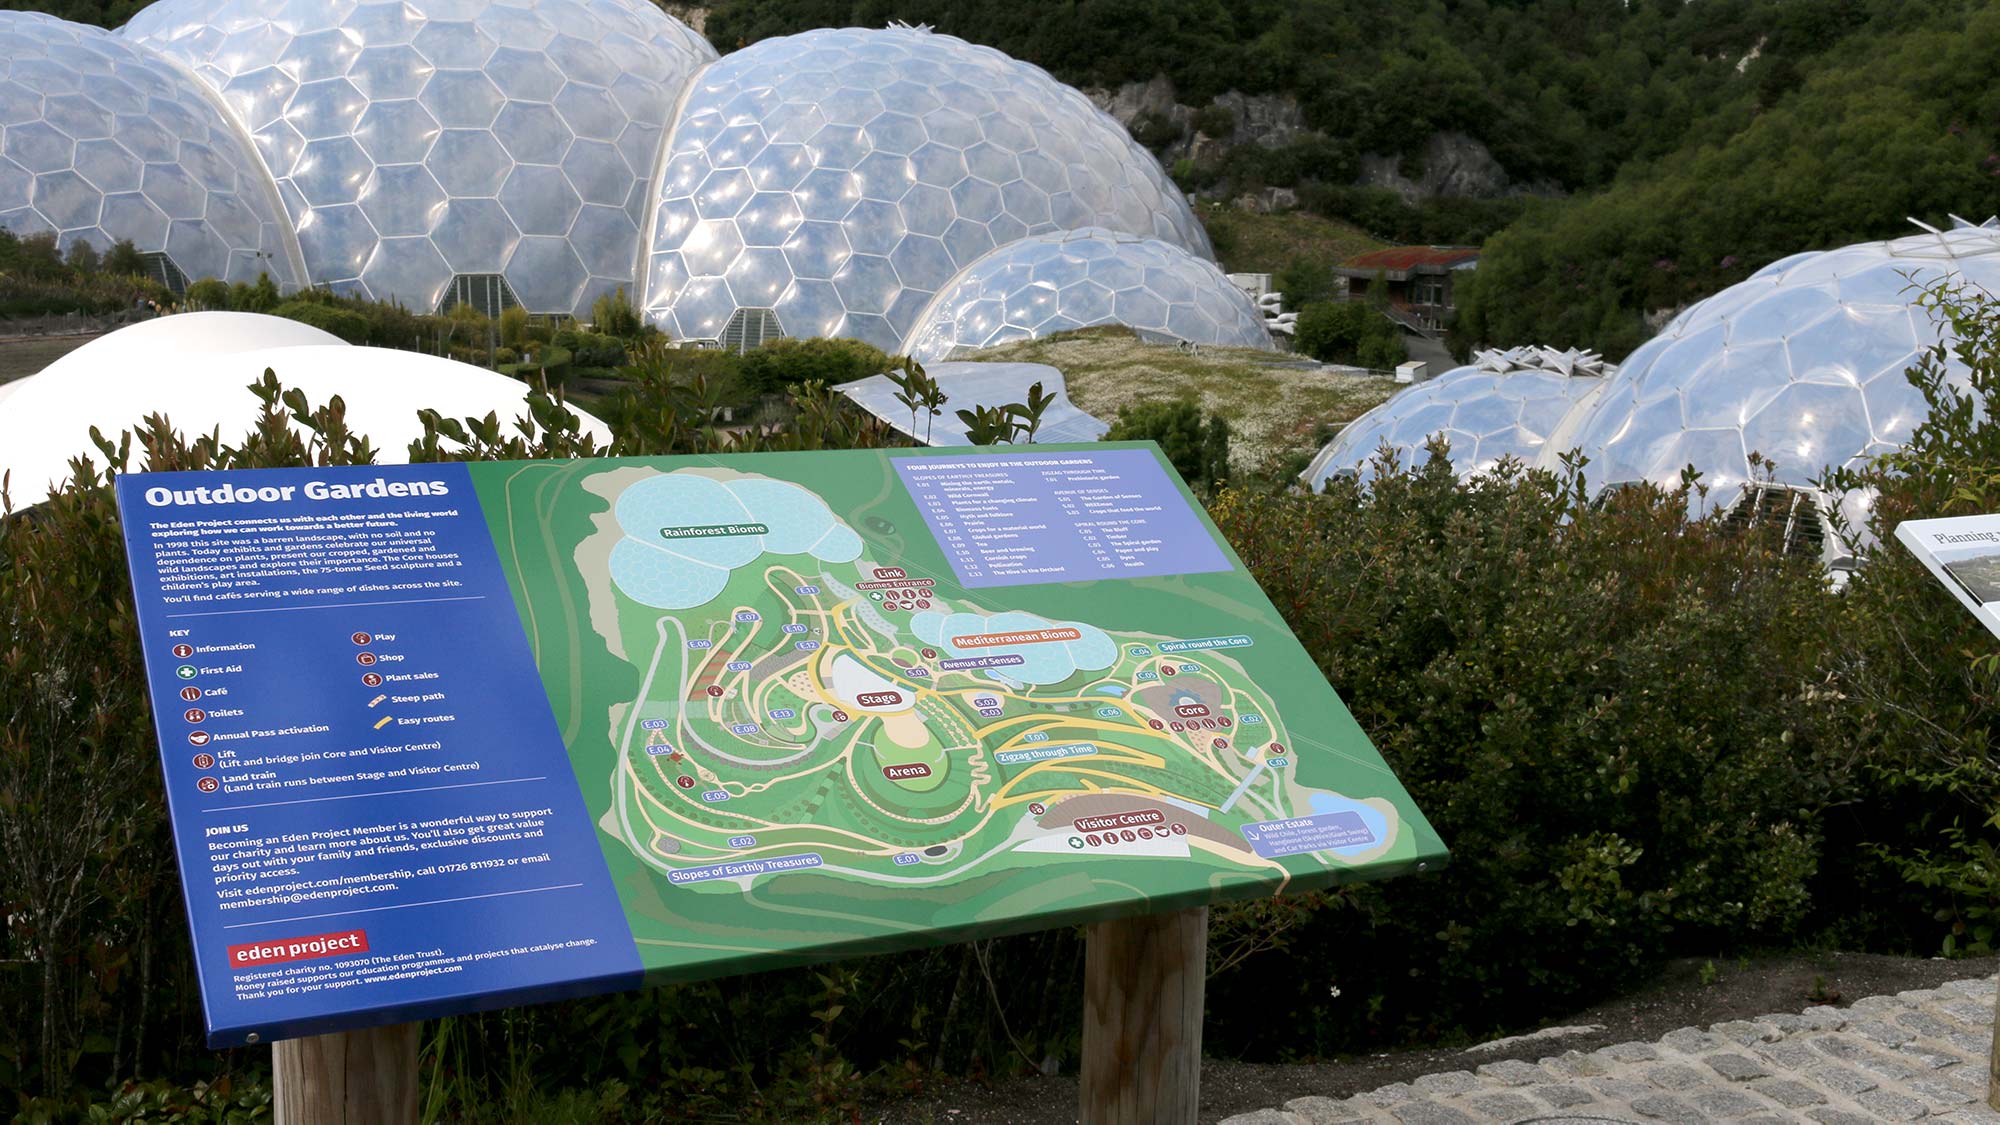 Eden Project maps and way-finding